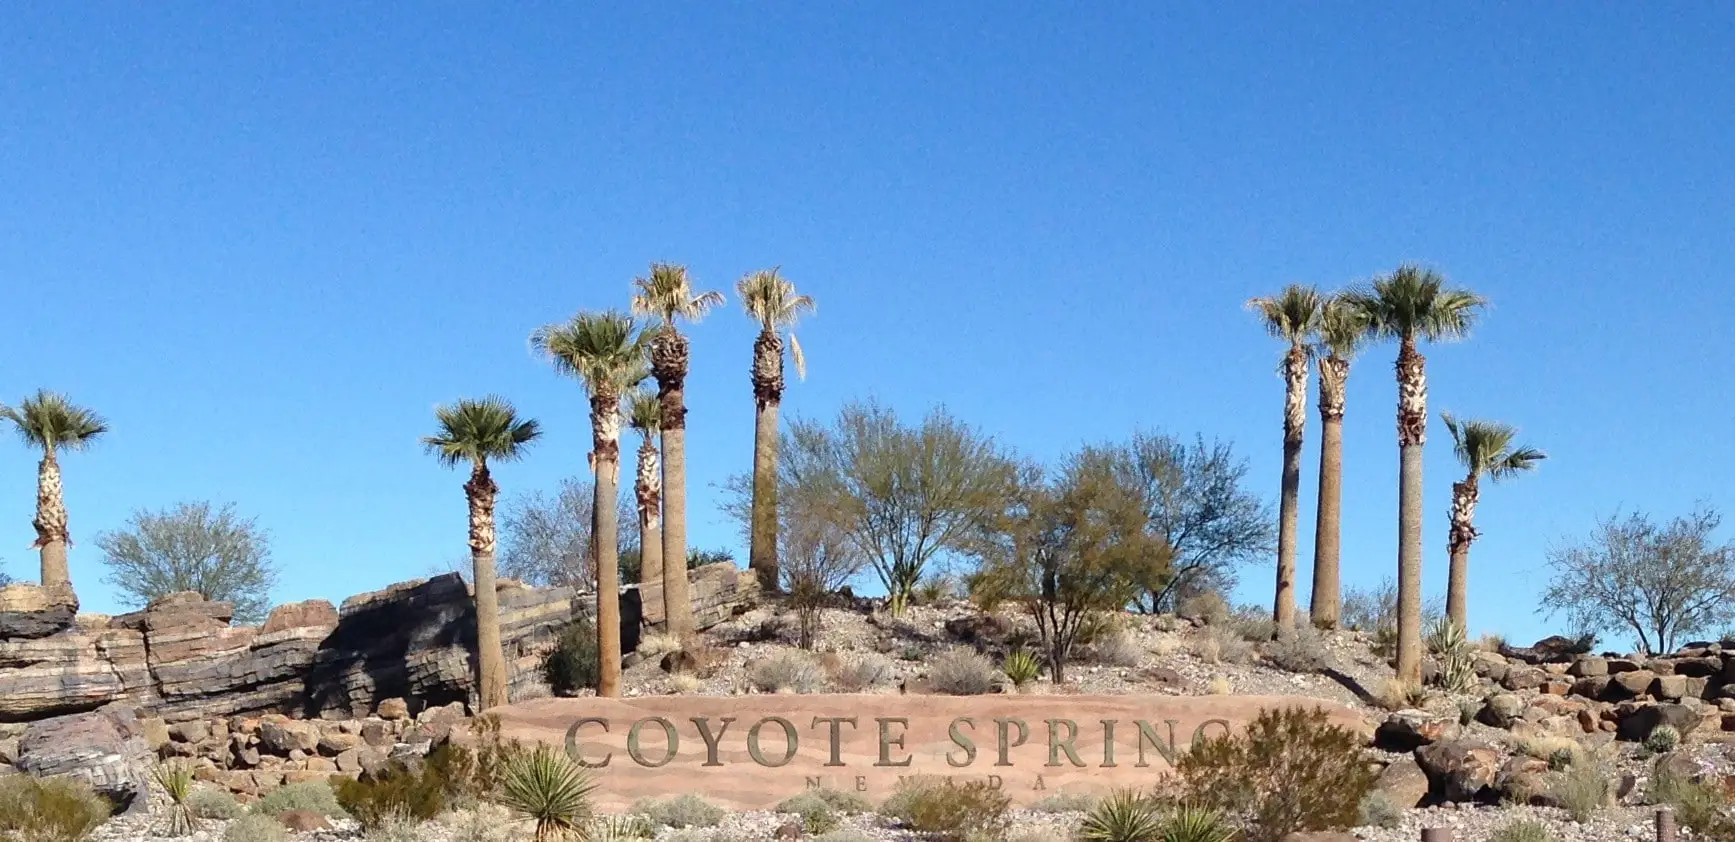 Entrance to Coyote Springs, Nevada